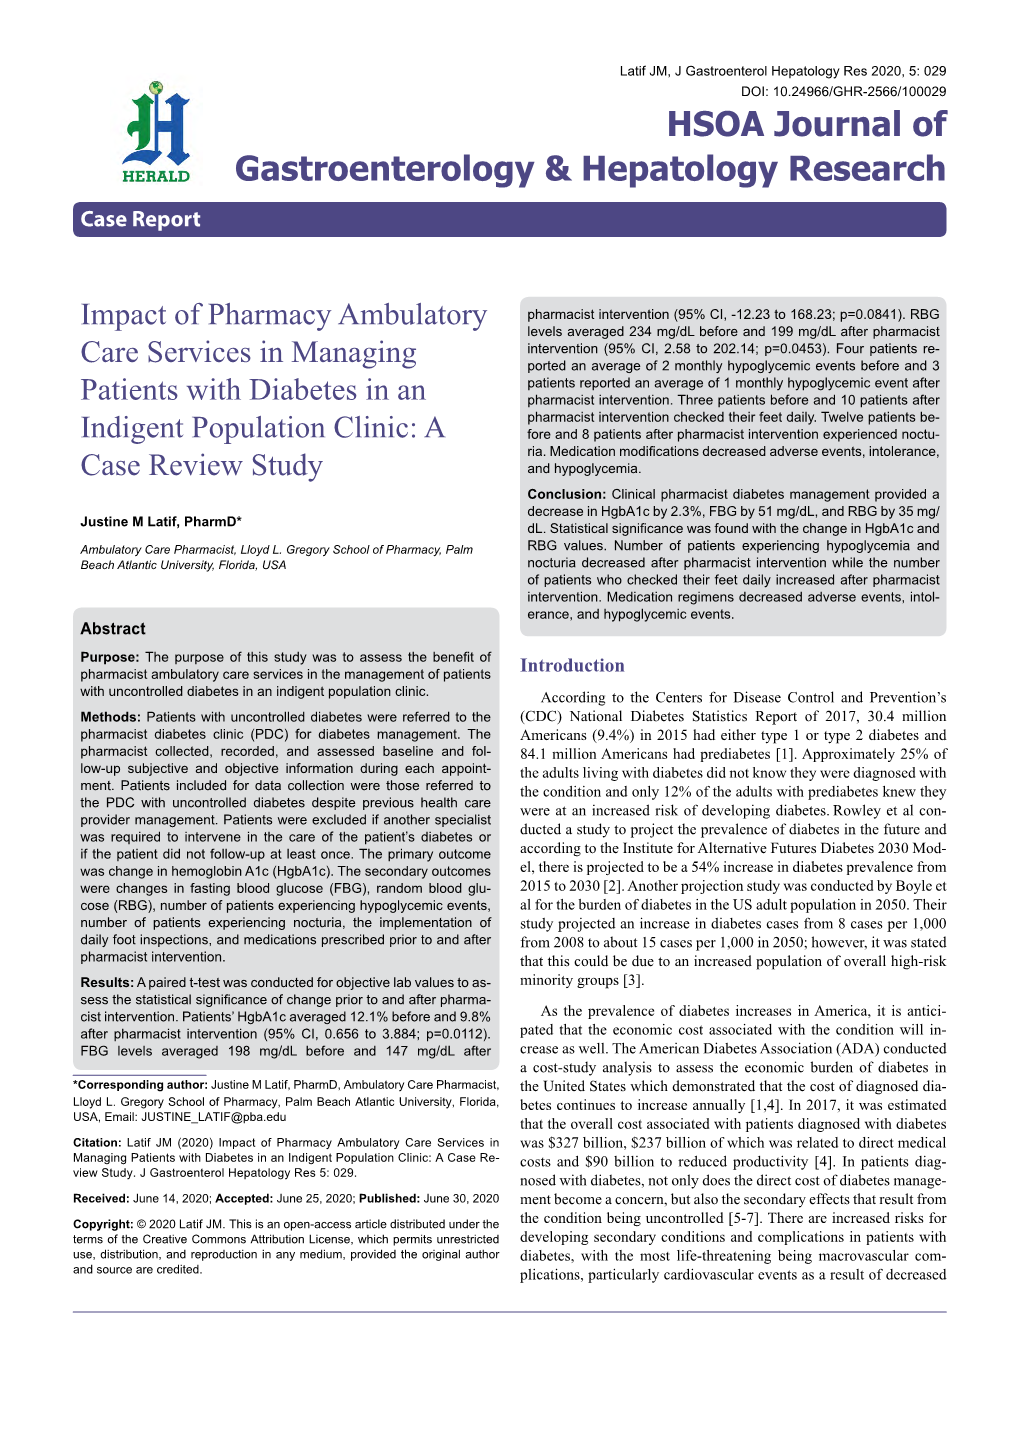 Impact of Pharmacy Ambulatory Care Services in Managing Patients with Diabetes in an Indigent Population Clinic: a Case Review Study